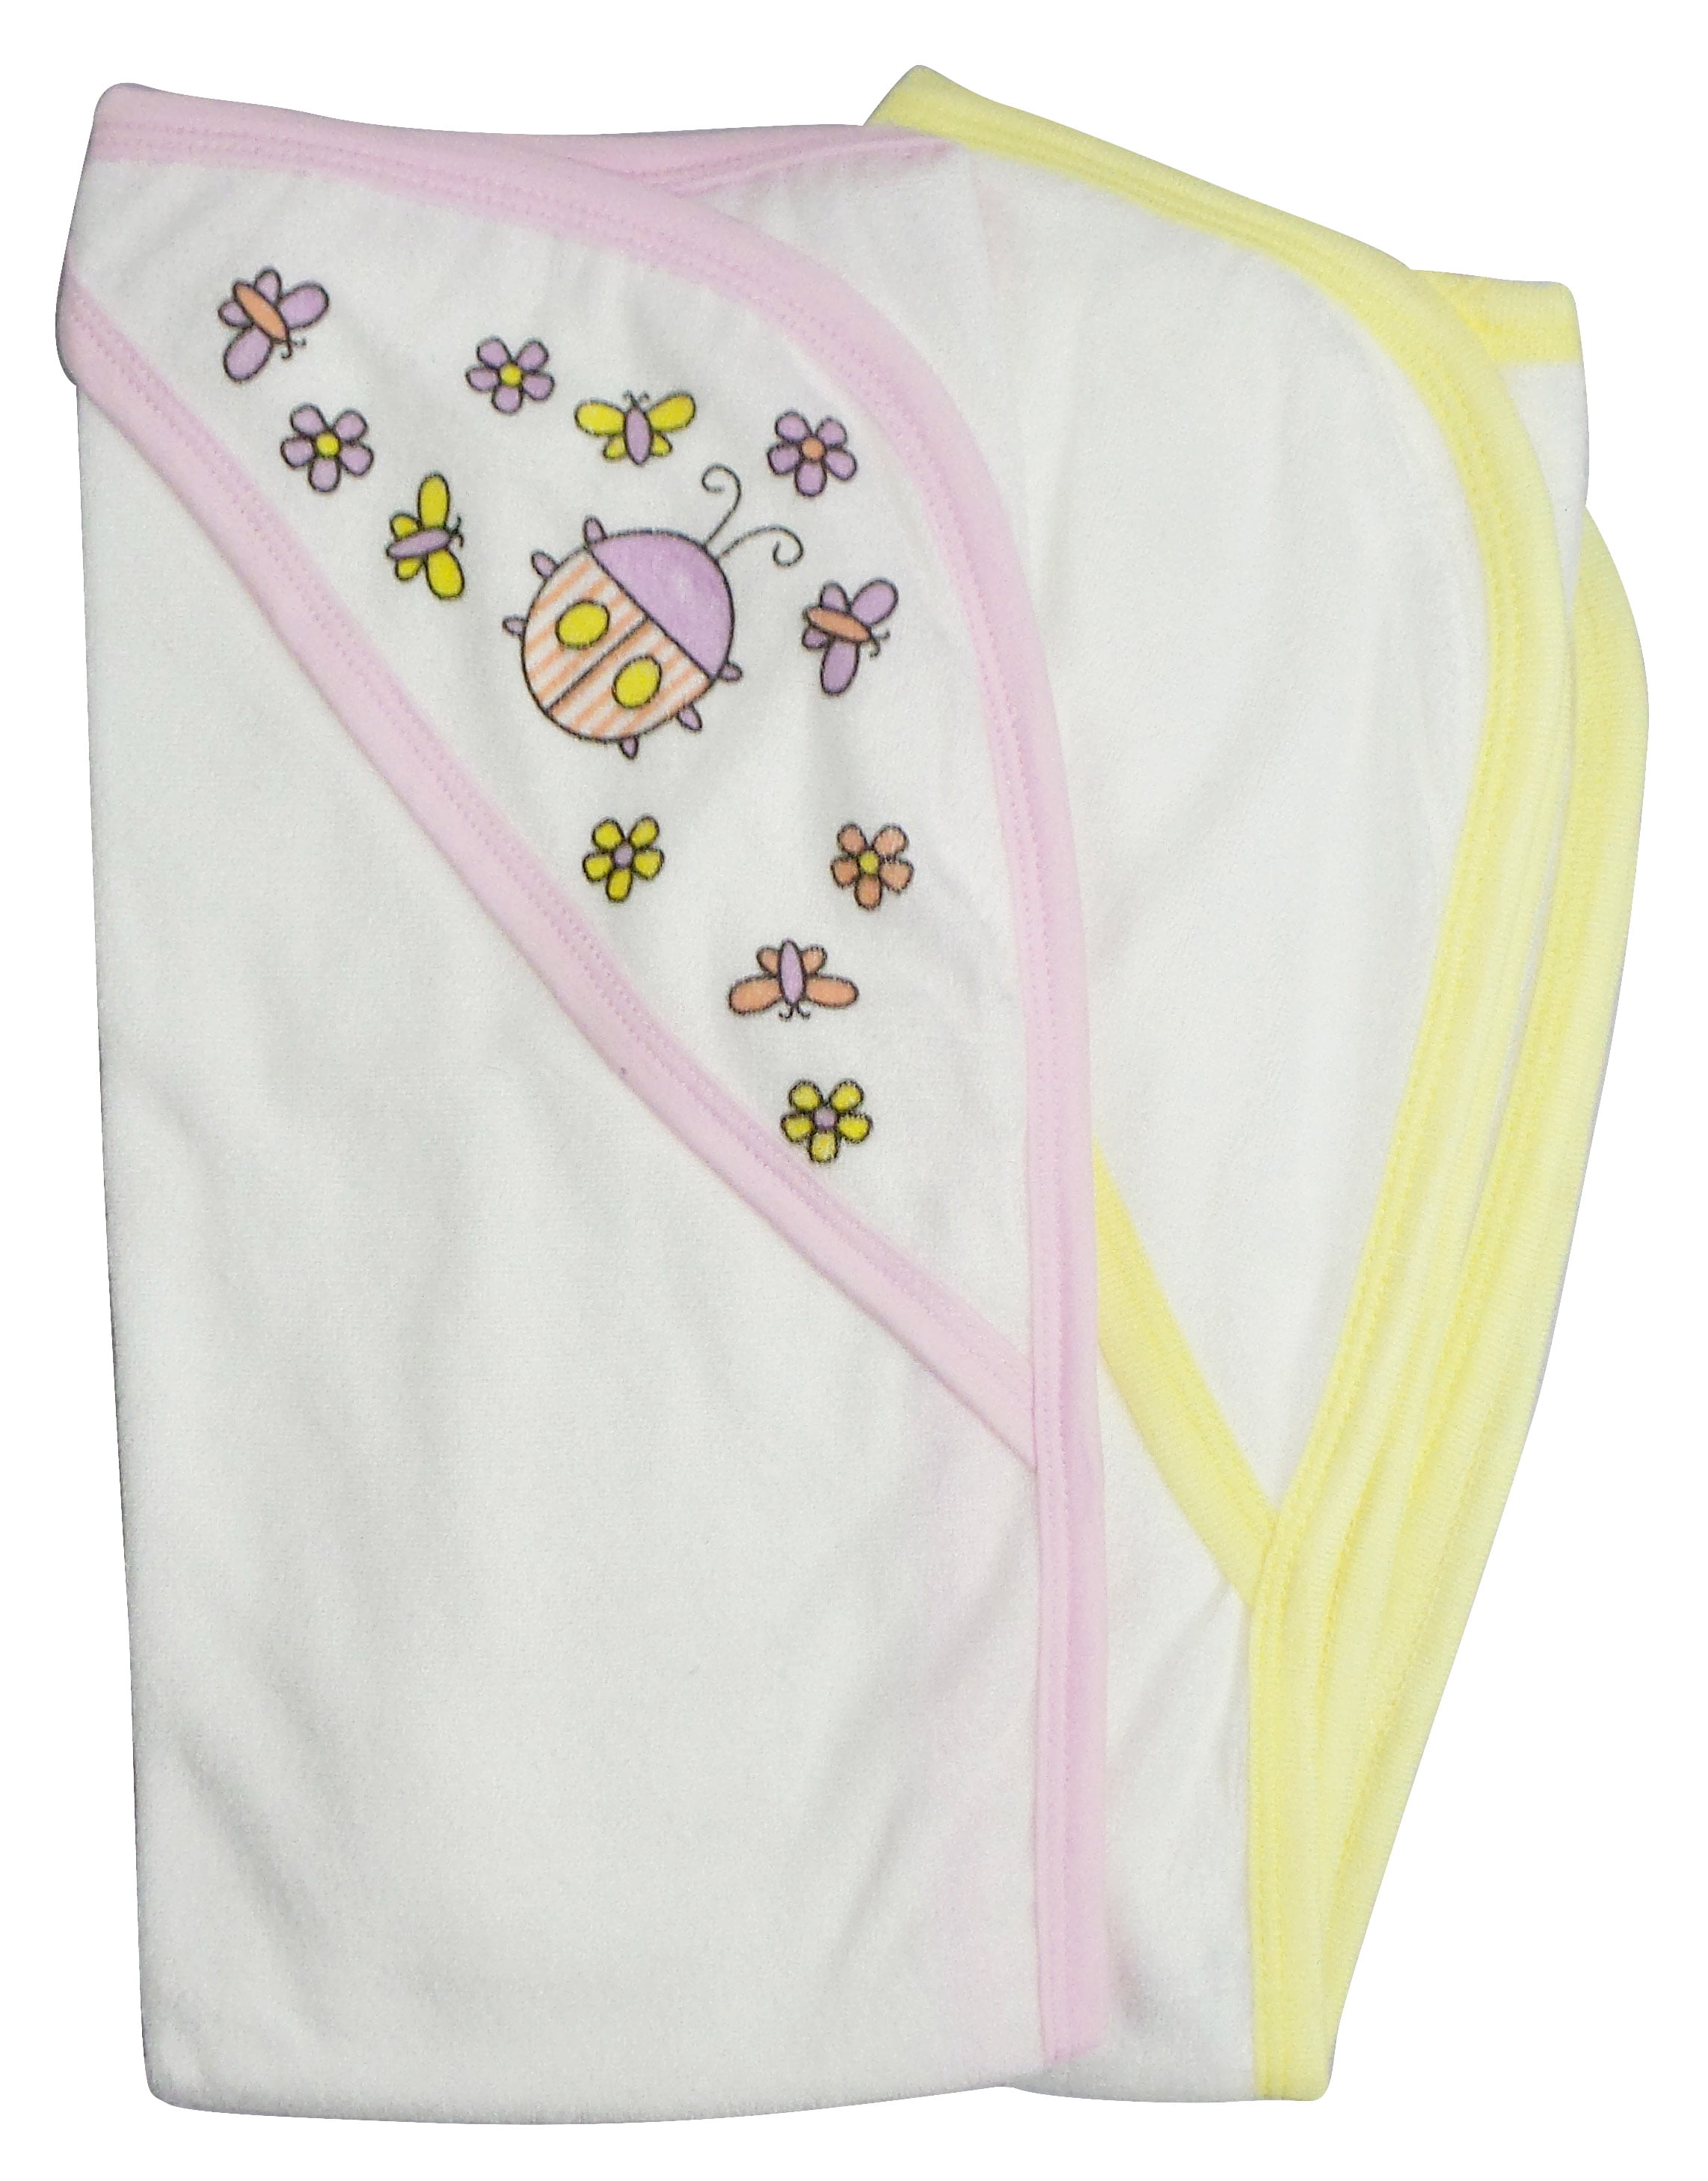 021-pink-021b-yellow Infant Hooded Bath Towel, Pink - Pack Of 2